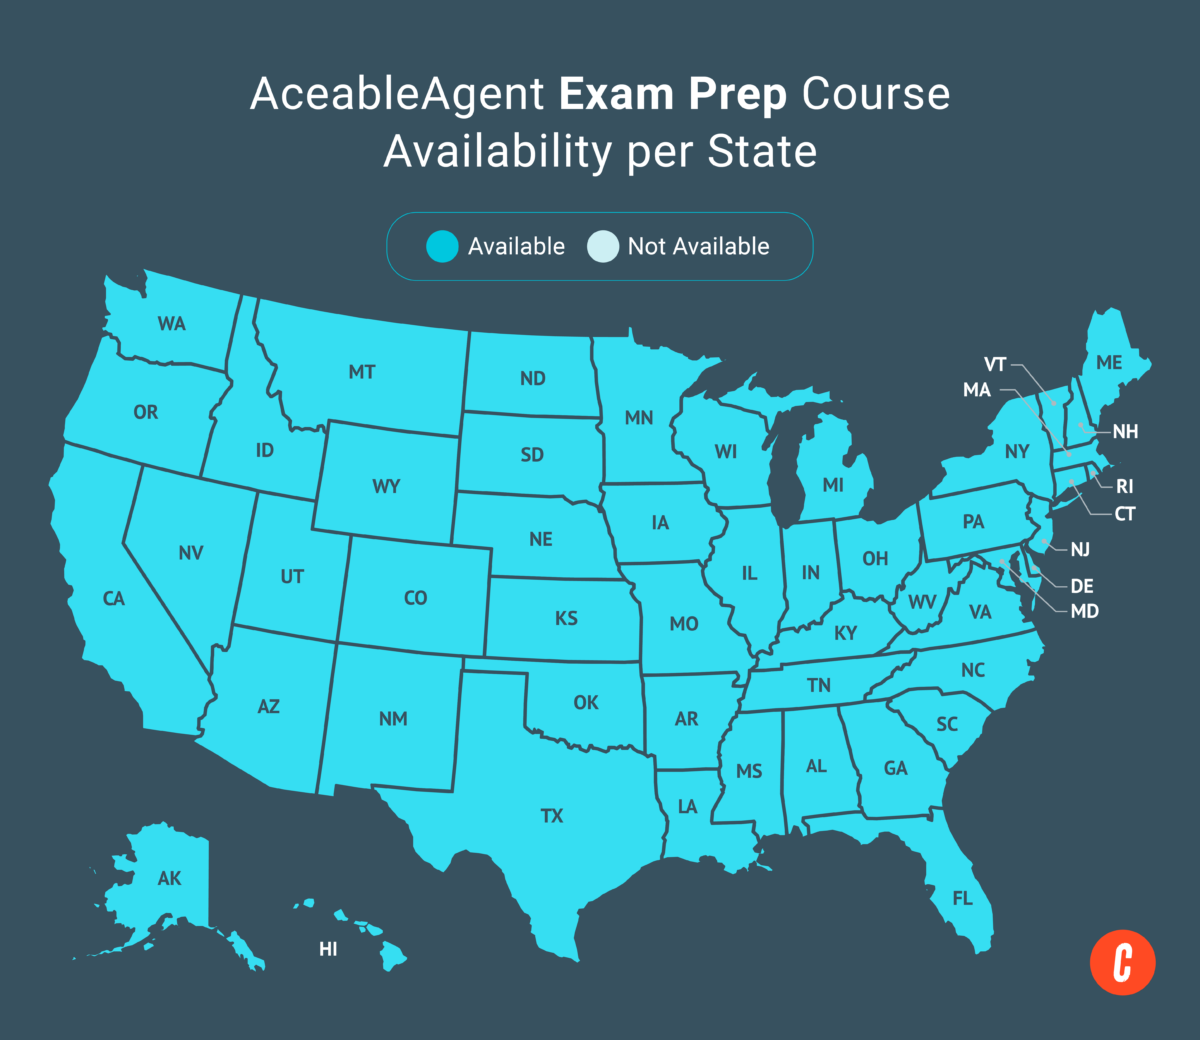 A U.S. map with states where AceableAgent's available exam prep courses are shaded